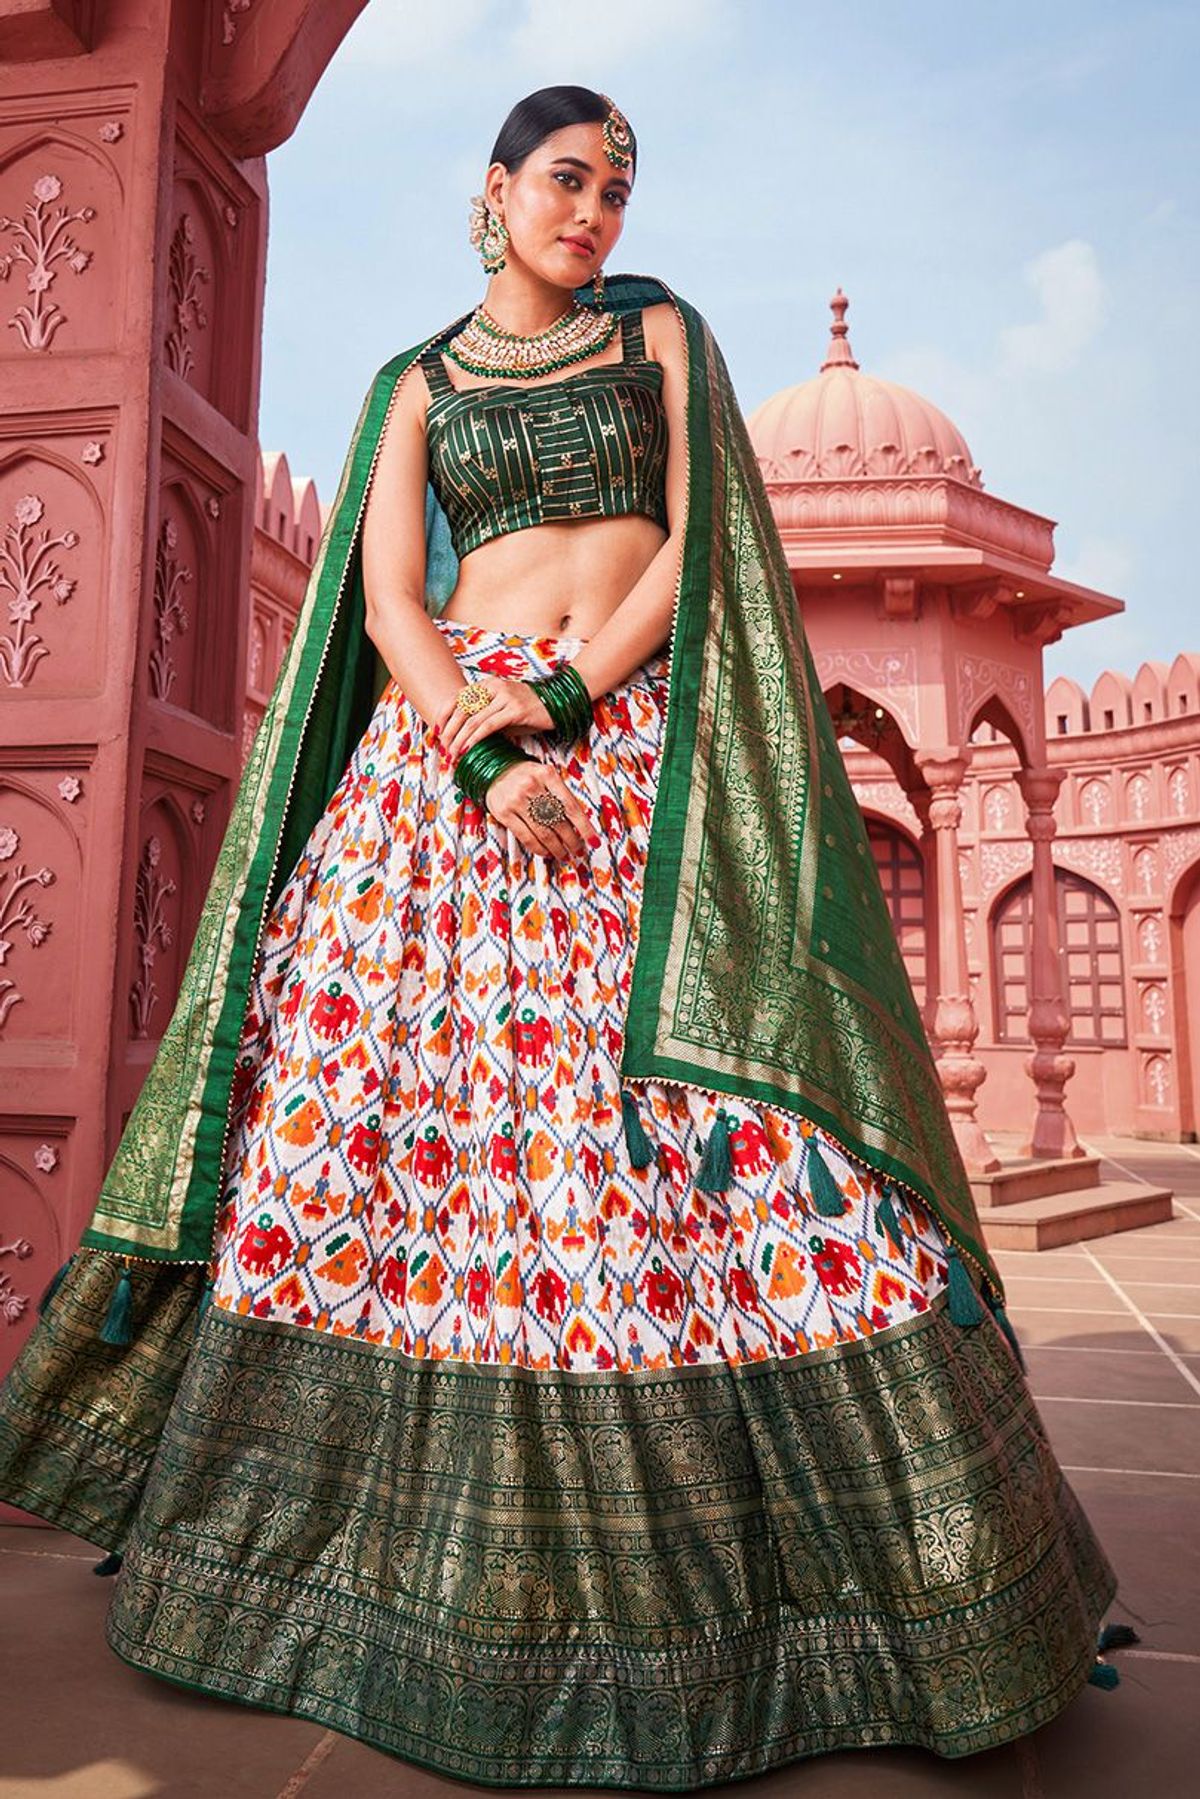 NineColours: Design Your Own Fully Customized Lehenga Choli with Worldwide  Free Shipping! Hurry! Shop Now!😍😍 | Milled